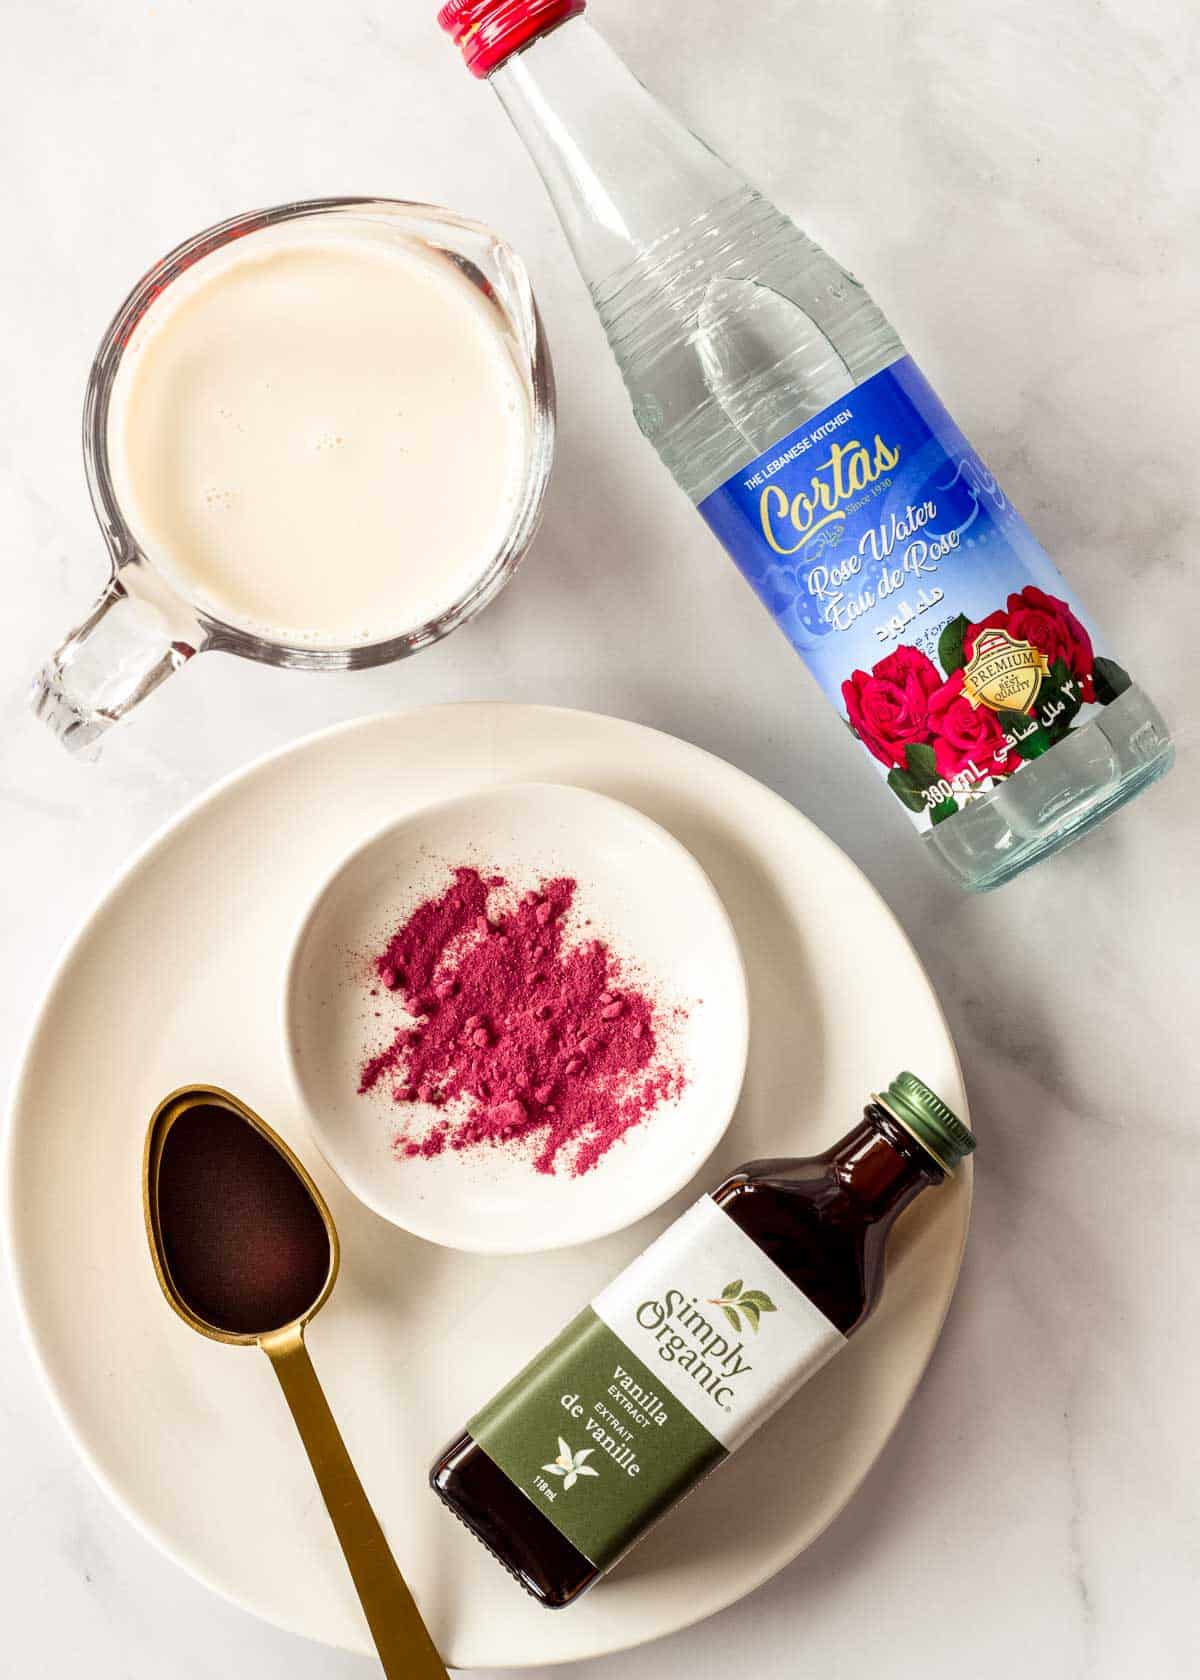 Ingredients to make a rose latte, including beet powder, rose water, vanilla extract and milk.